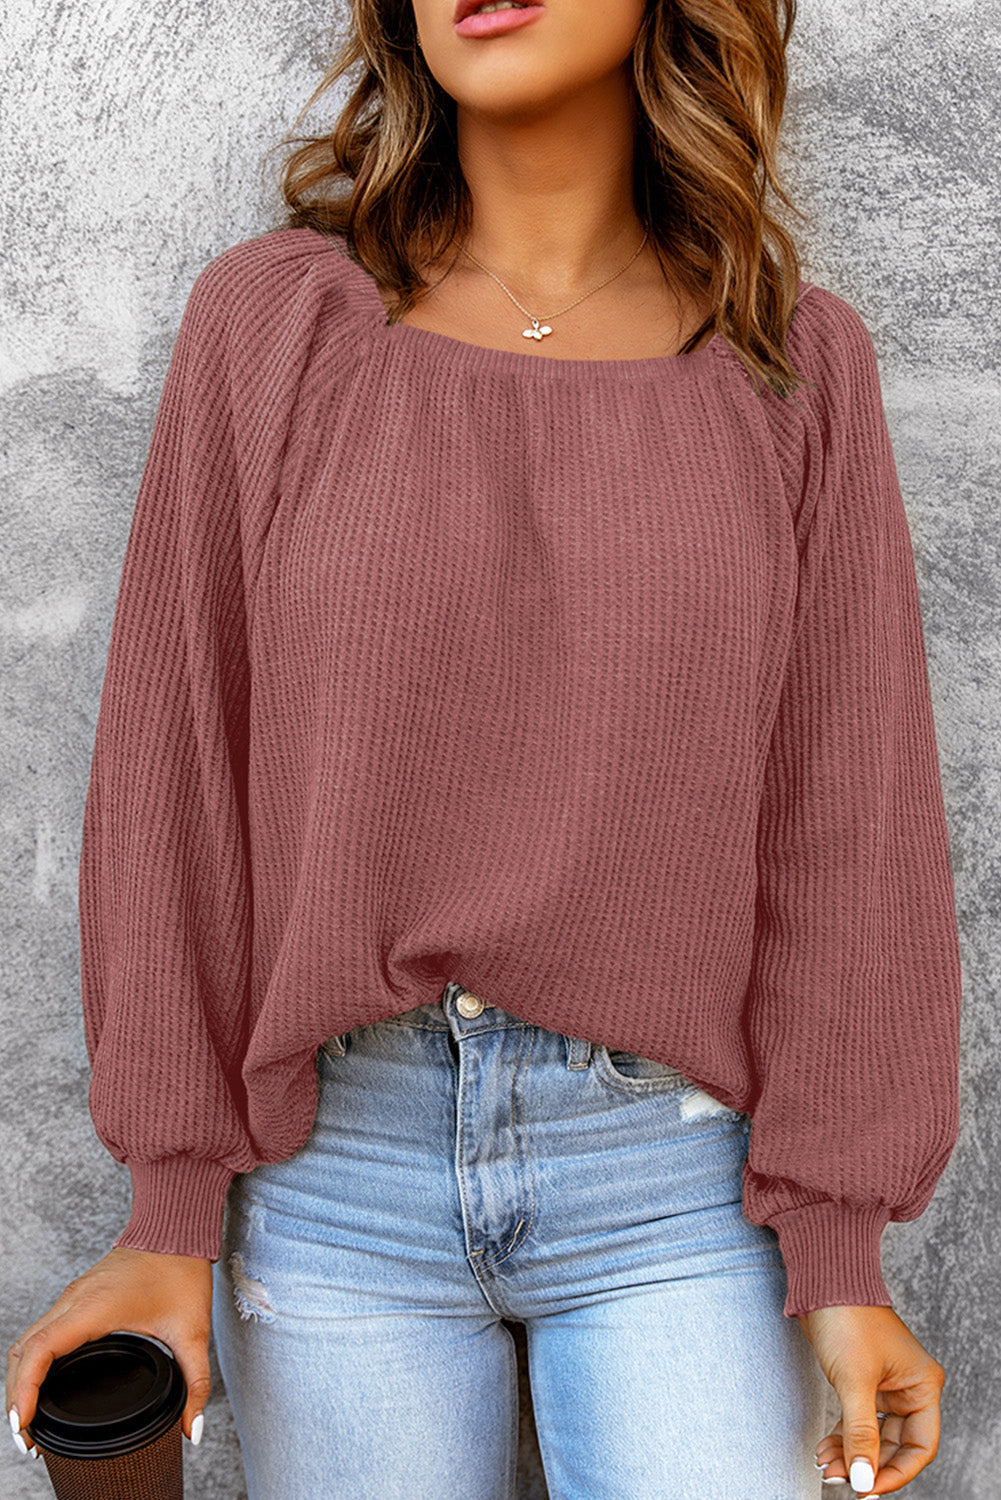 Waffle knit Square Neck Pullover Top